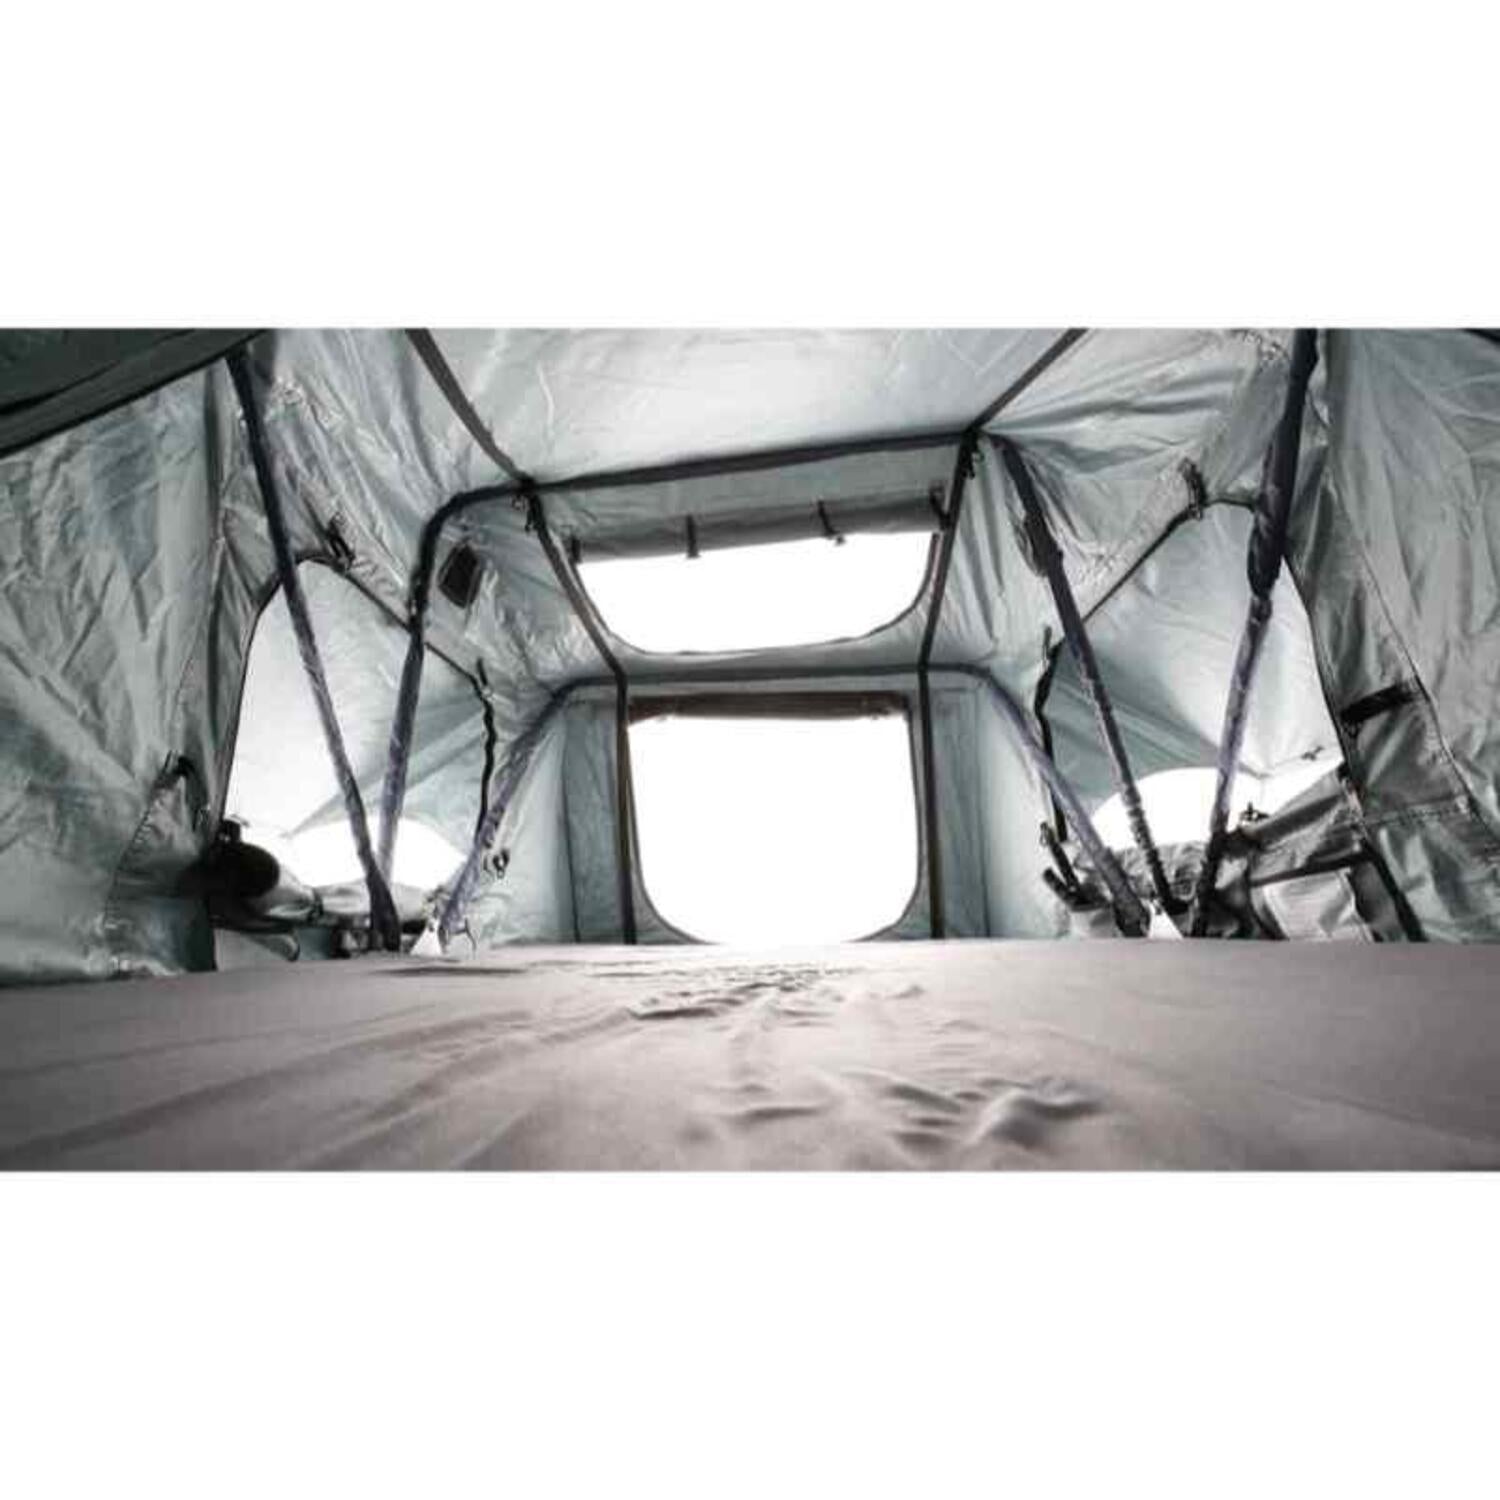 Body Armor Sky Ridge Pike 2-Person Roof Top Tent Inside View - Roof Top Tents